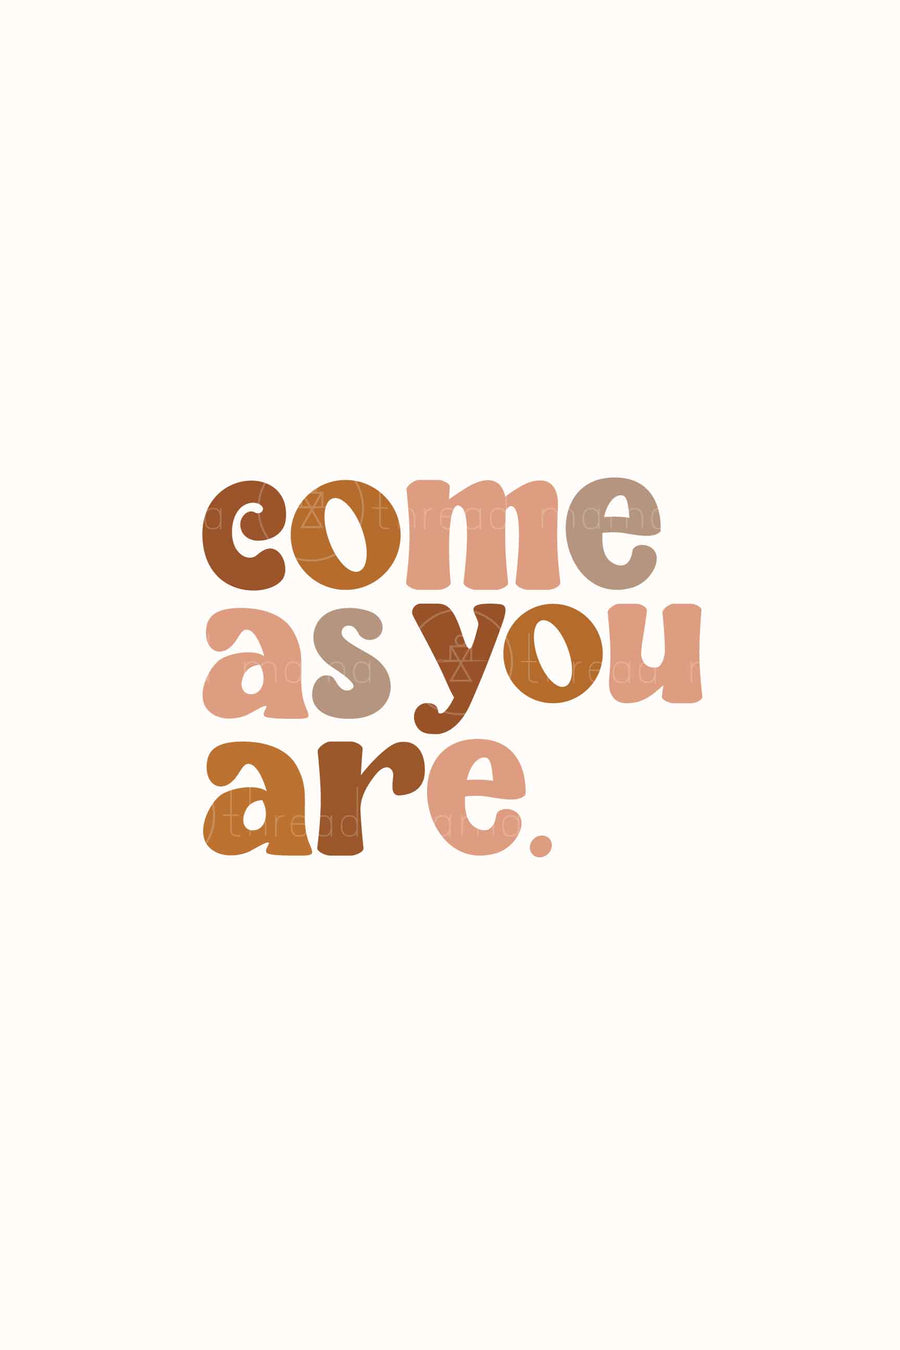 Come As You Are (Printable Poster)